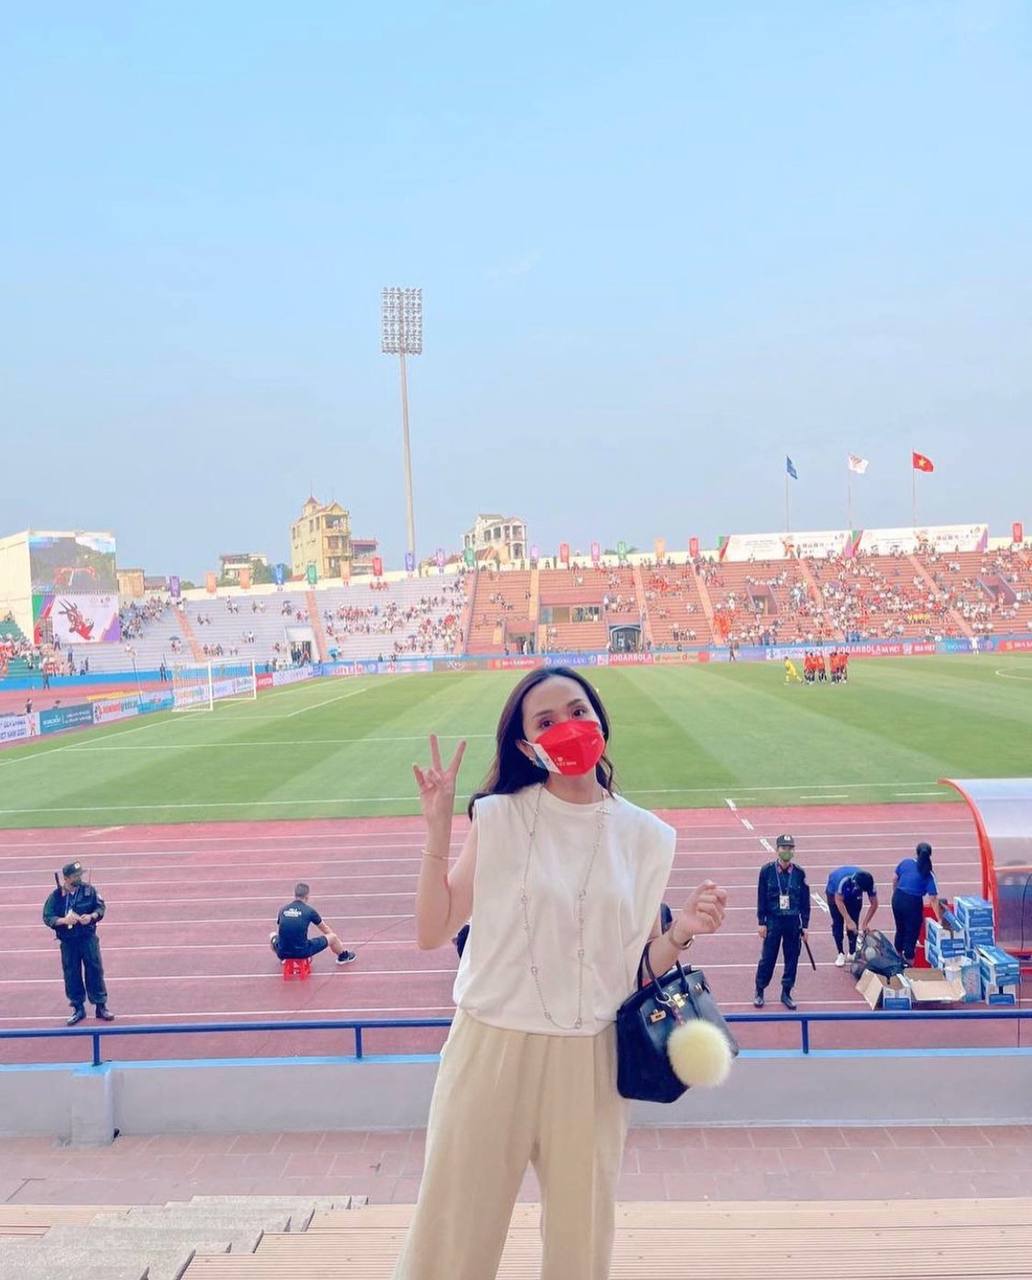 The daughter of the former President of Saigon Club and her son checked-in to Viet Tri Stadium very early, cheering U23 to debut at the 31st SEA Games - Photo 2.